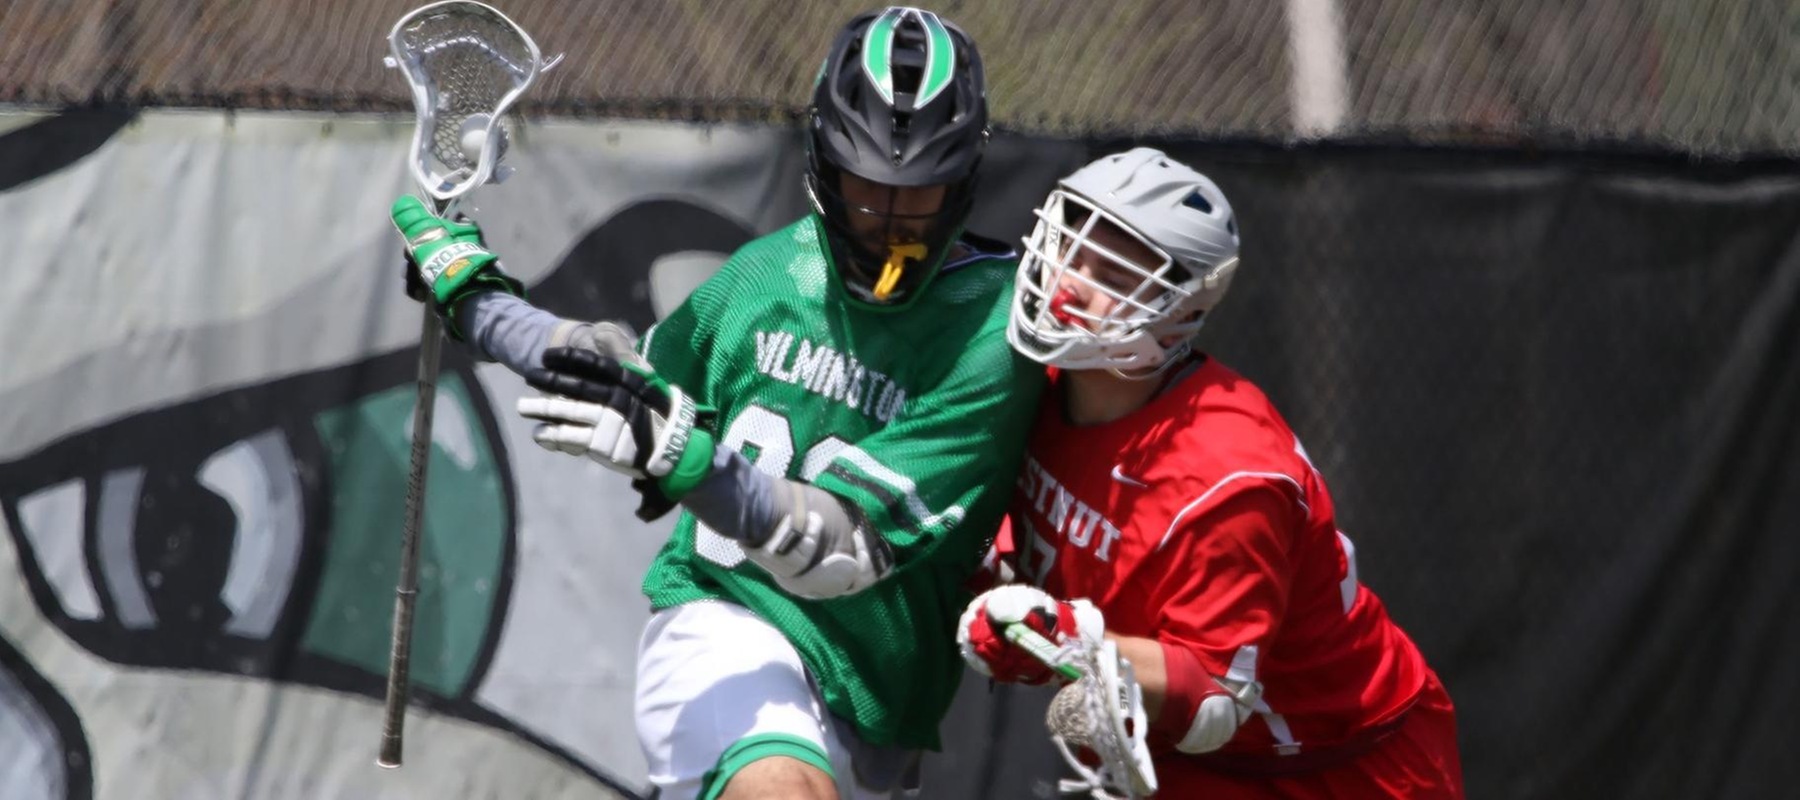 Copyright 2018; Wilmington University. All rights reserved. File photo of Dylan McCleaft who scored twice and added four assists at Montreat. Photo by Frank Stallworth. April 21, 2018 vs. Chestnut Hill.